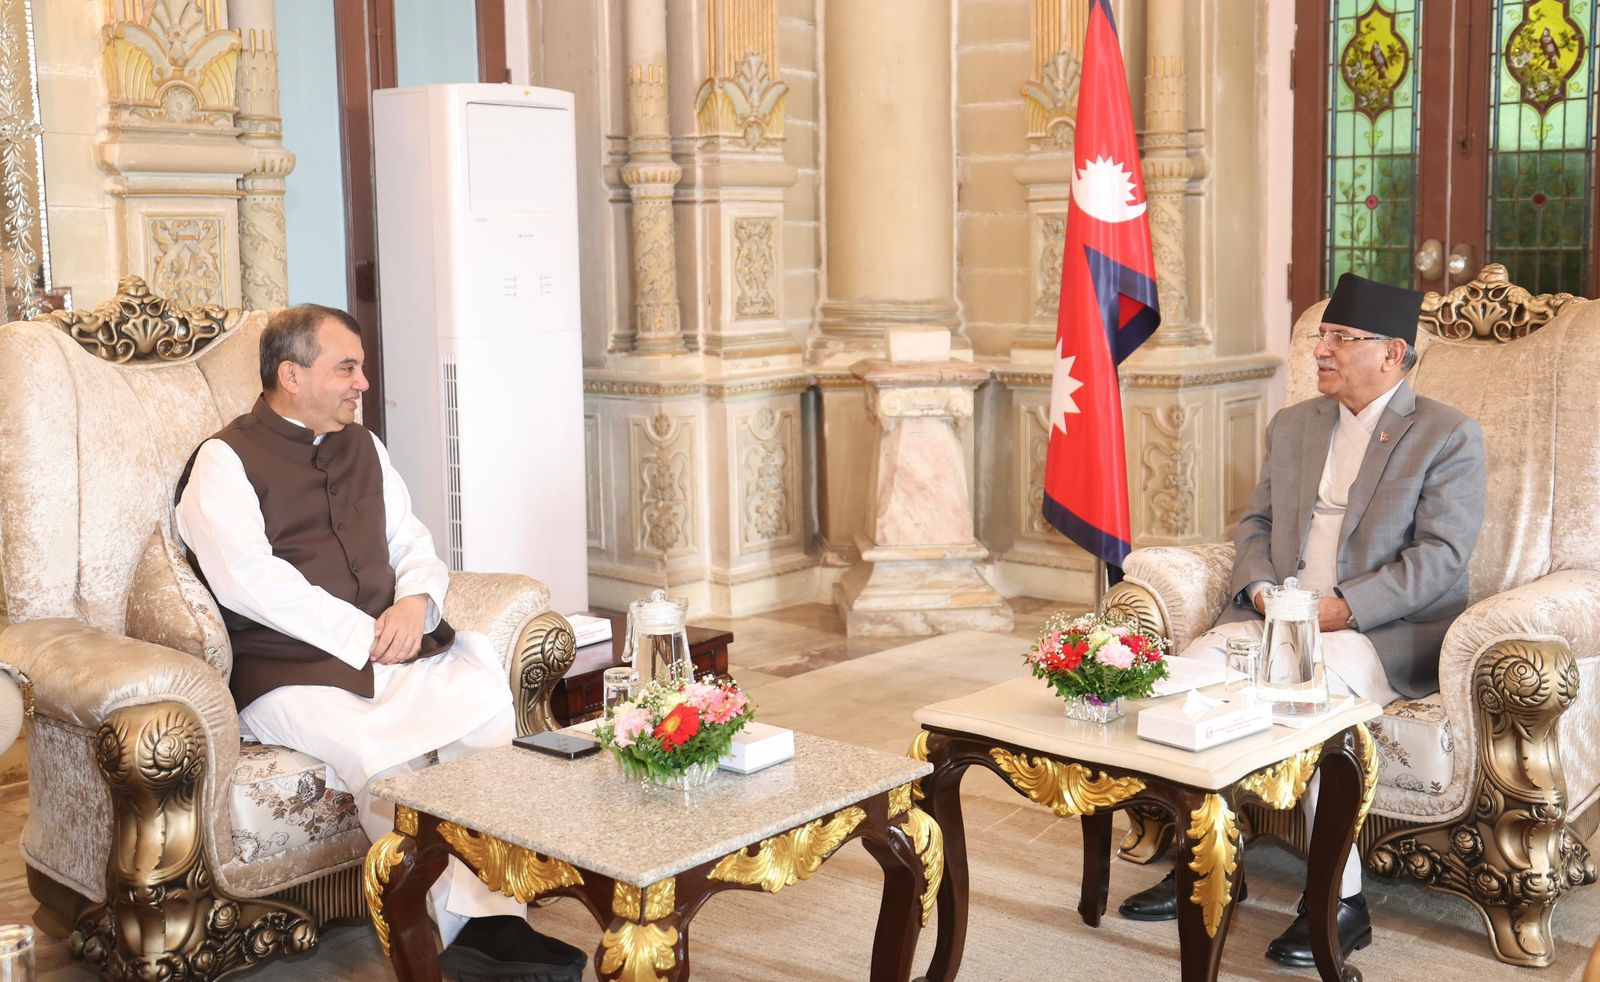 Bangladesh, Nepal stress joint commitment to addressing environmental, climate issues